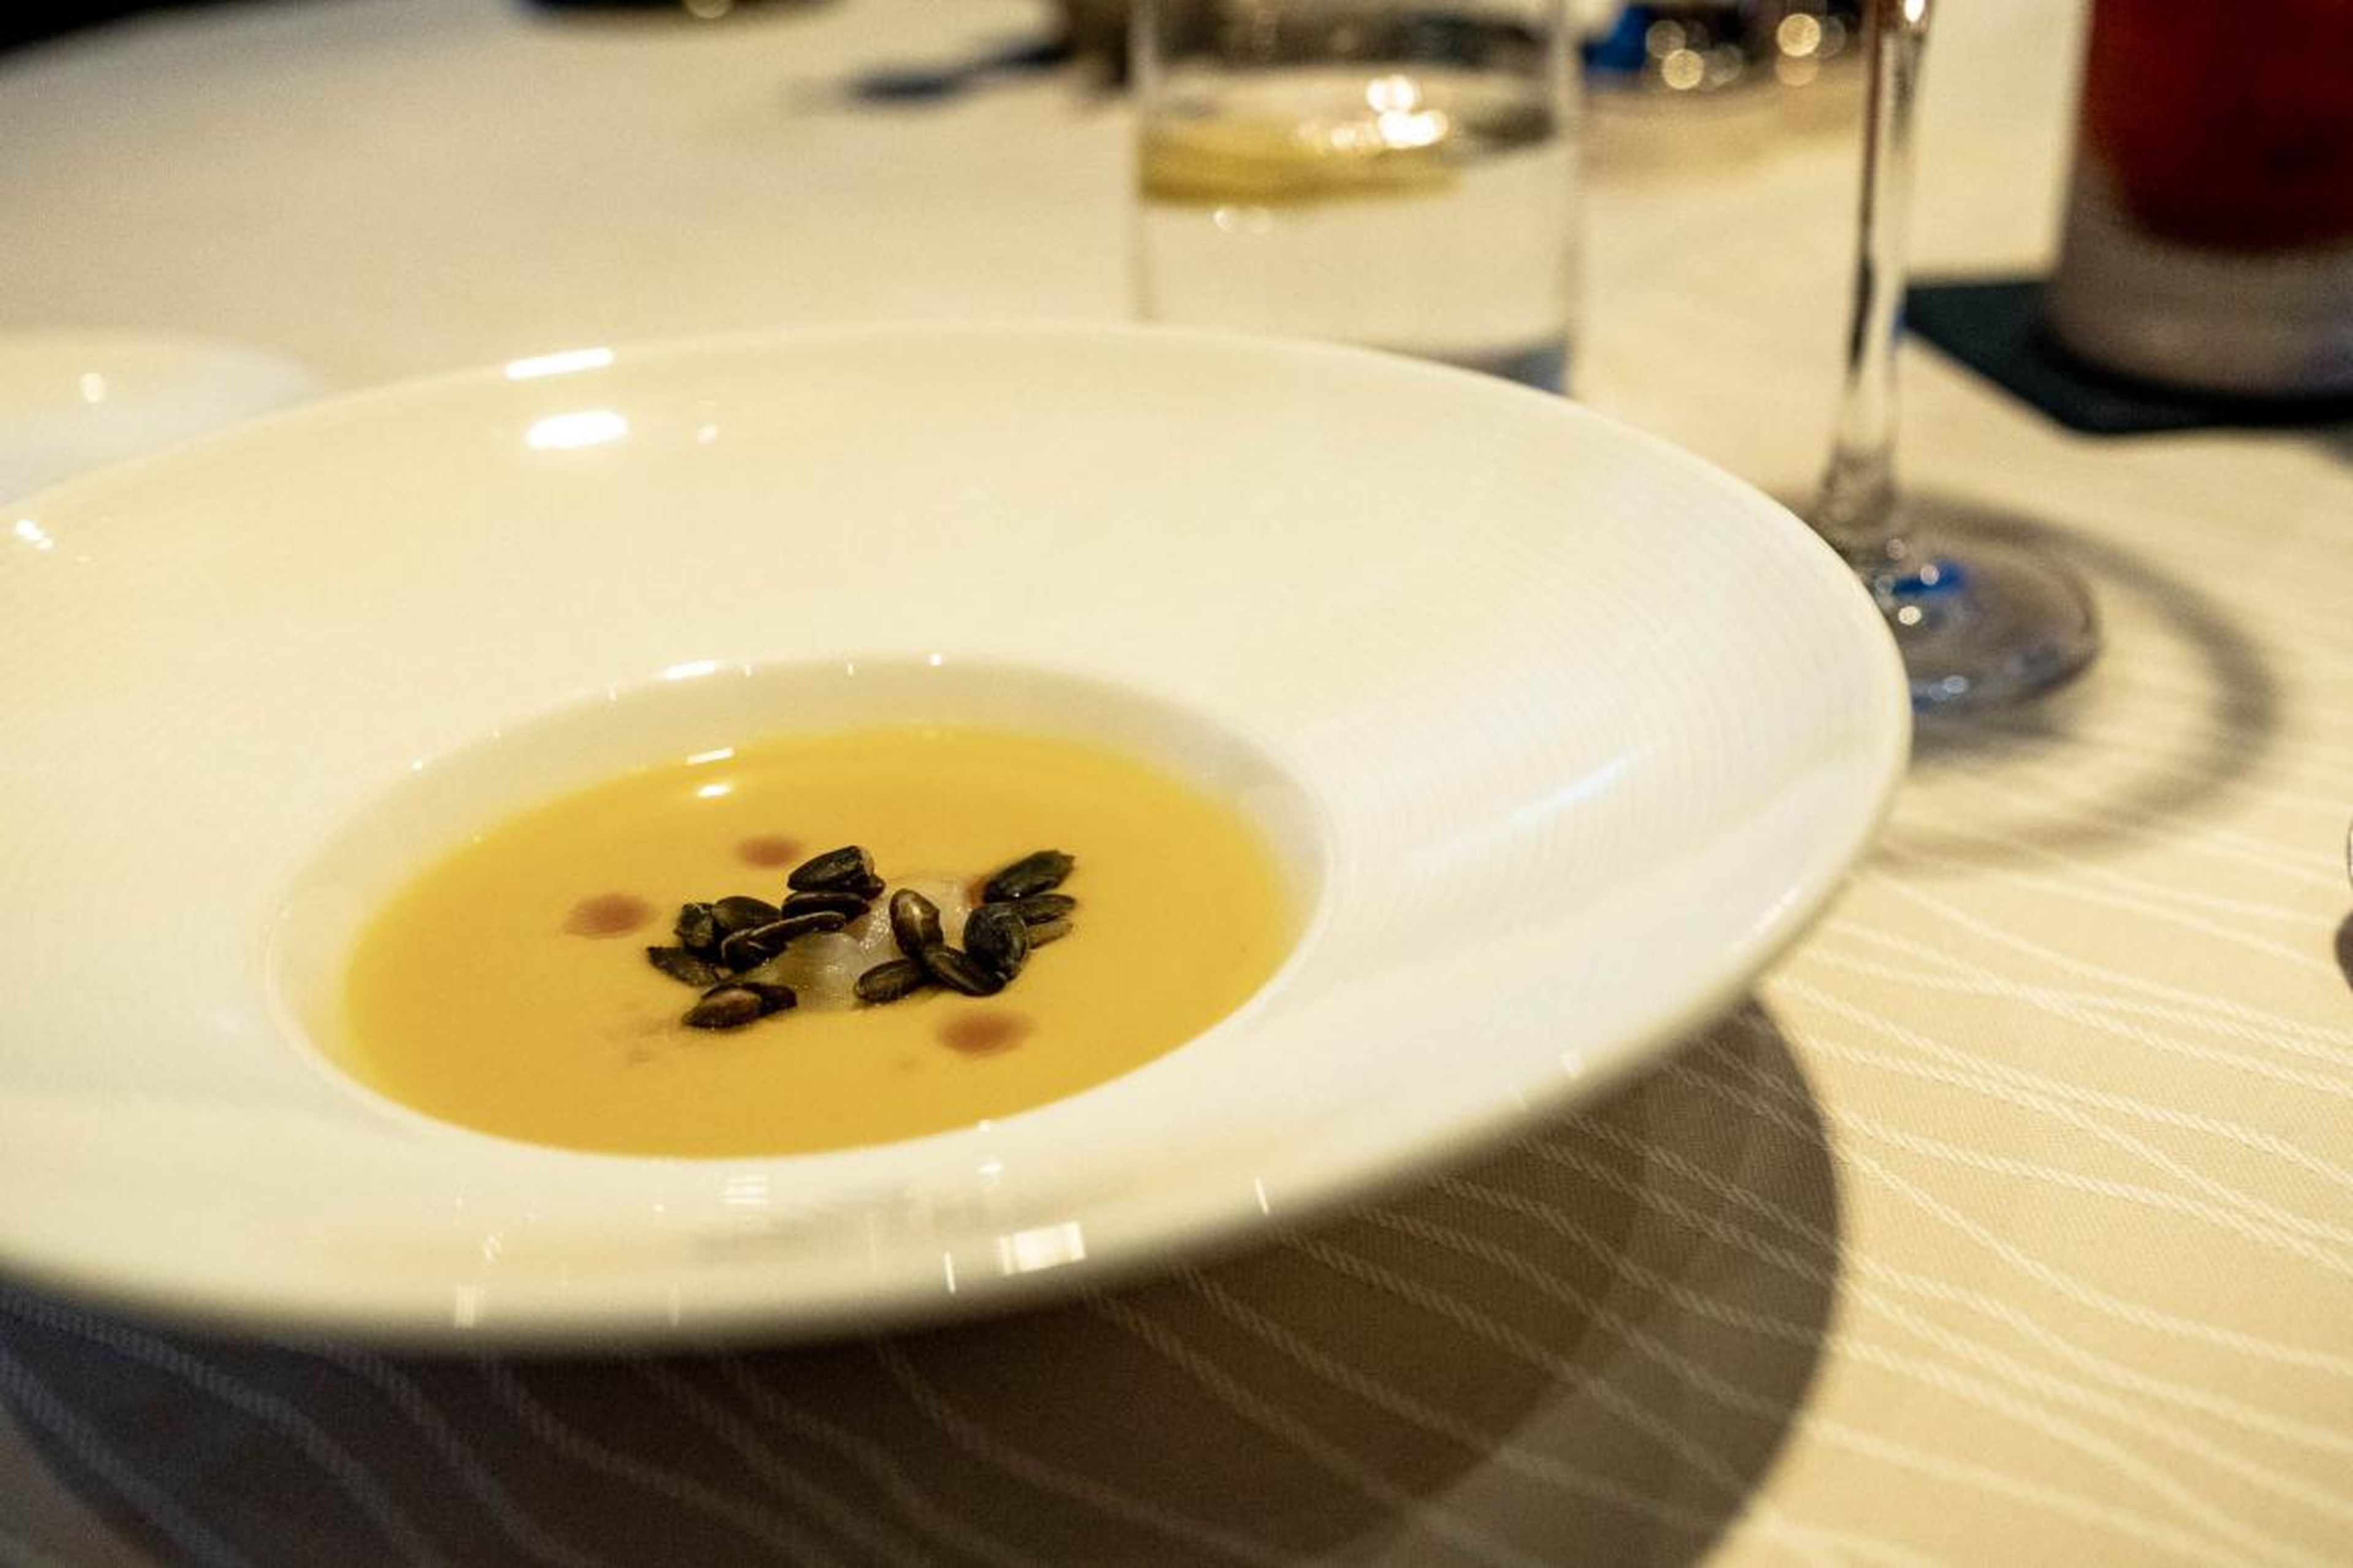 Before I even had the chance to order, the water brought over an amuse-bouche —that's a small, complimentary hors d'œuvre — of butternut squash soup. The mellow soup was brought alive by smoked pumpkin seeds and slivers of briny